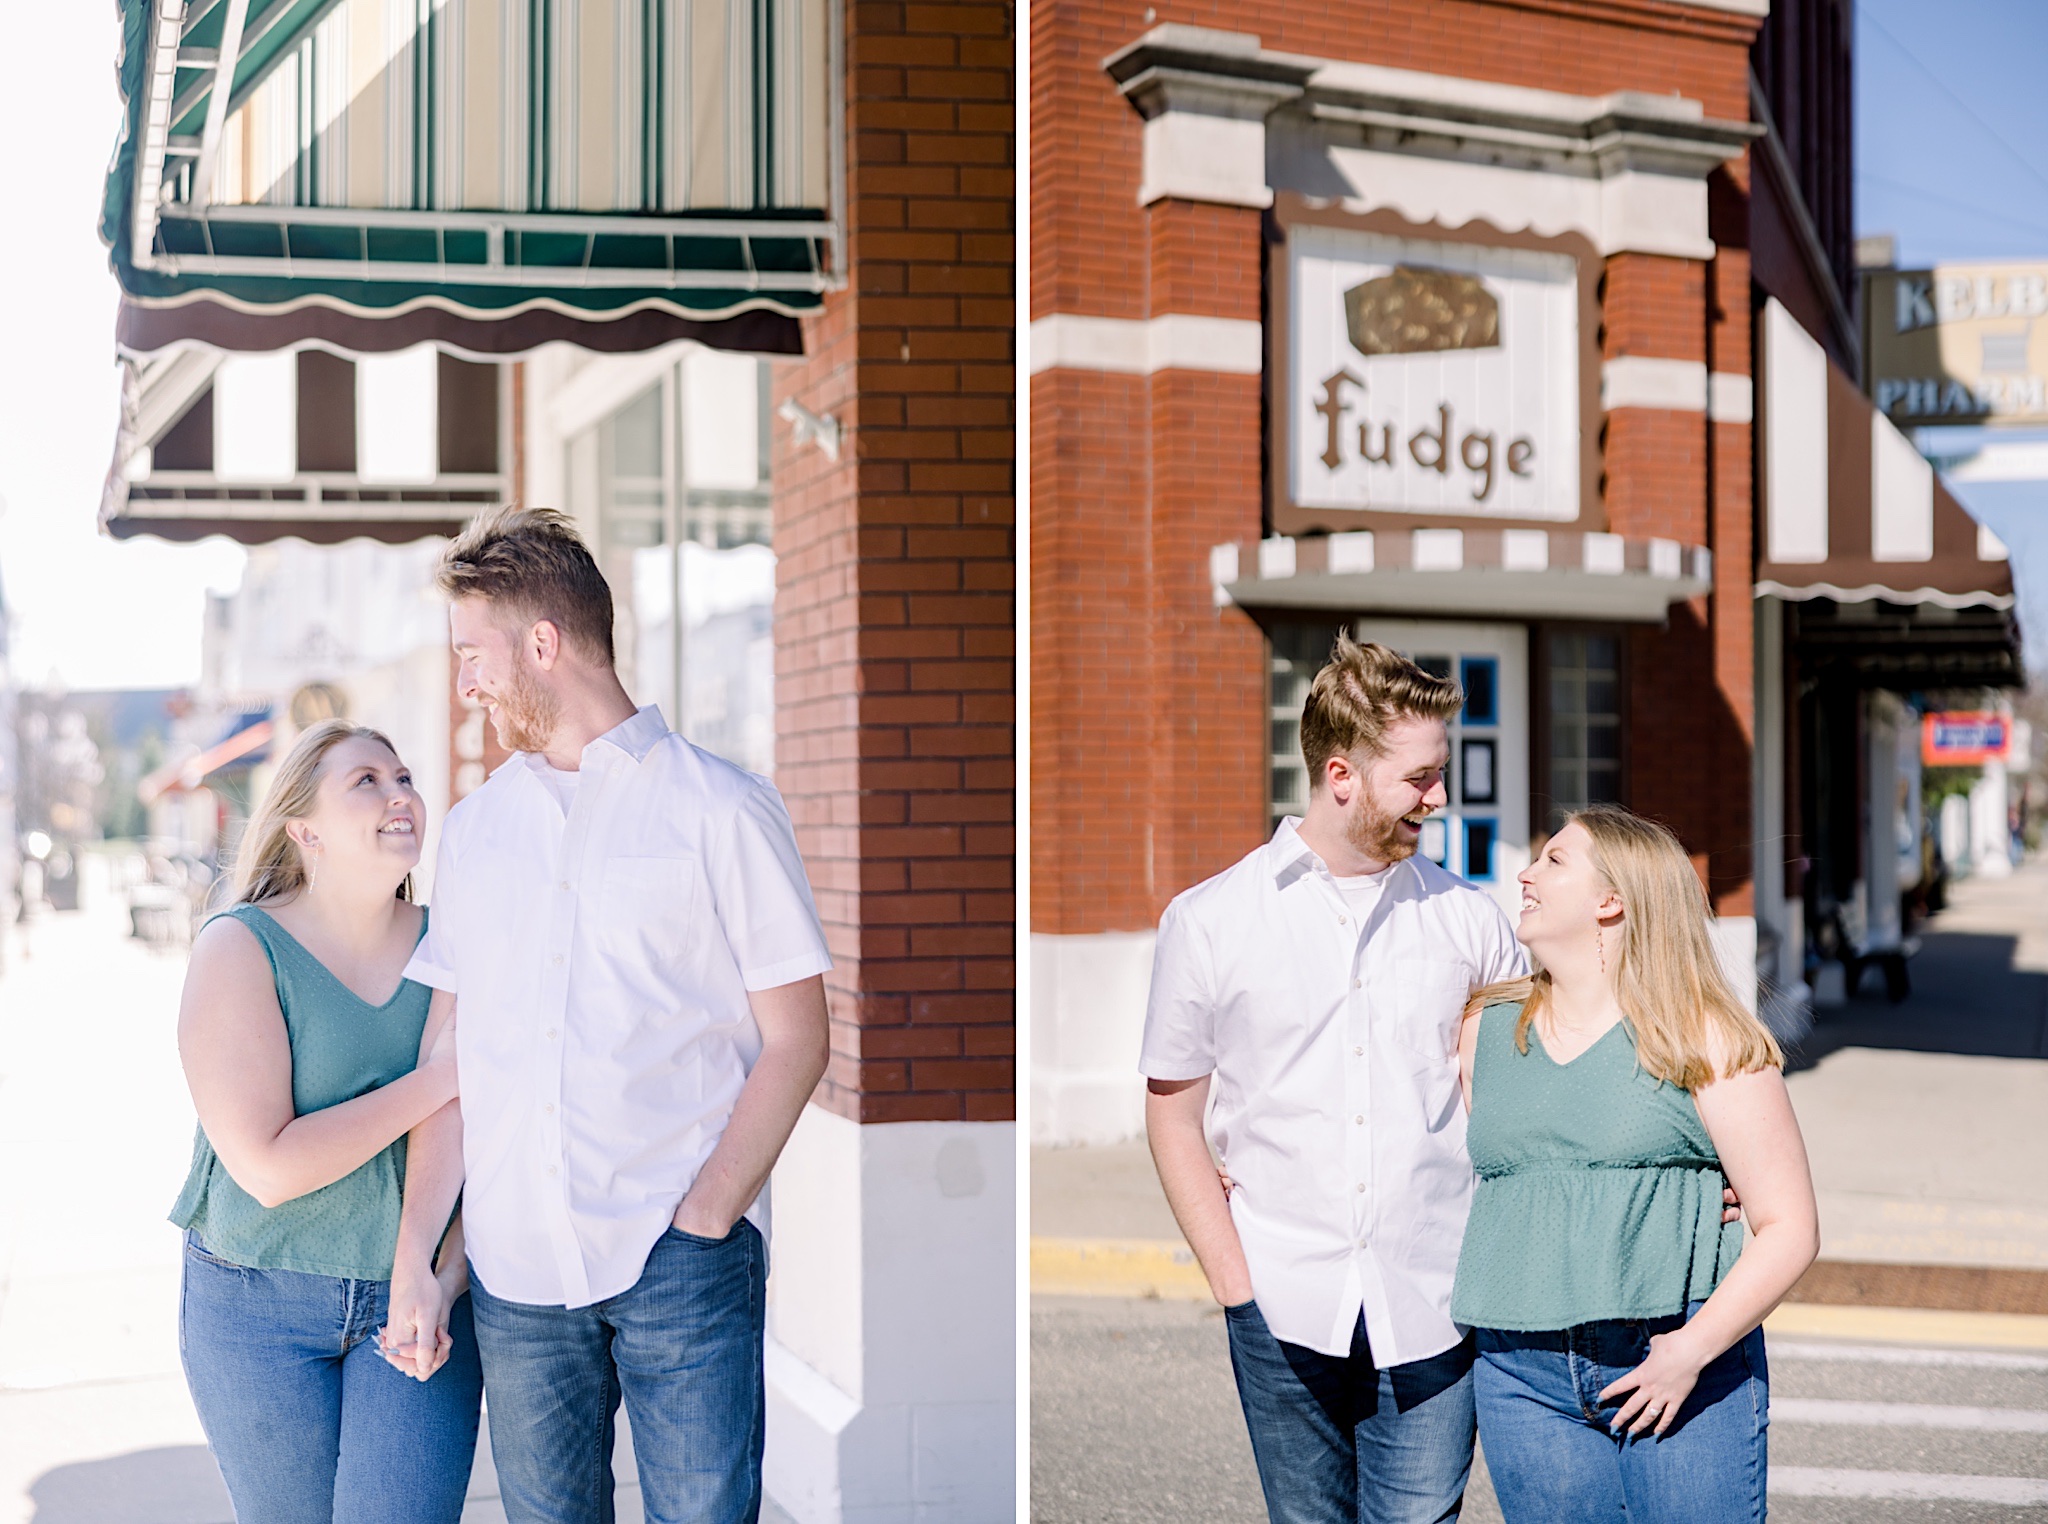 Bride and groom stroll downtown Harbor Springs in front of Fudge shop during their Harbor Springs engagement session.